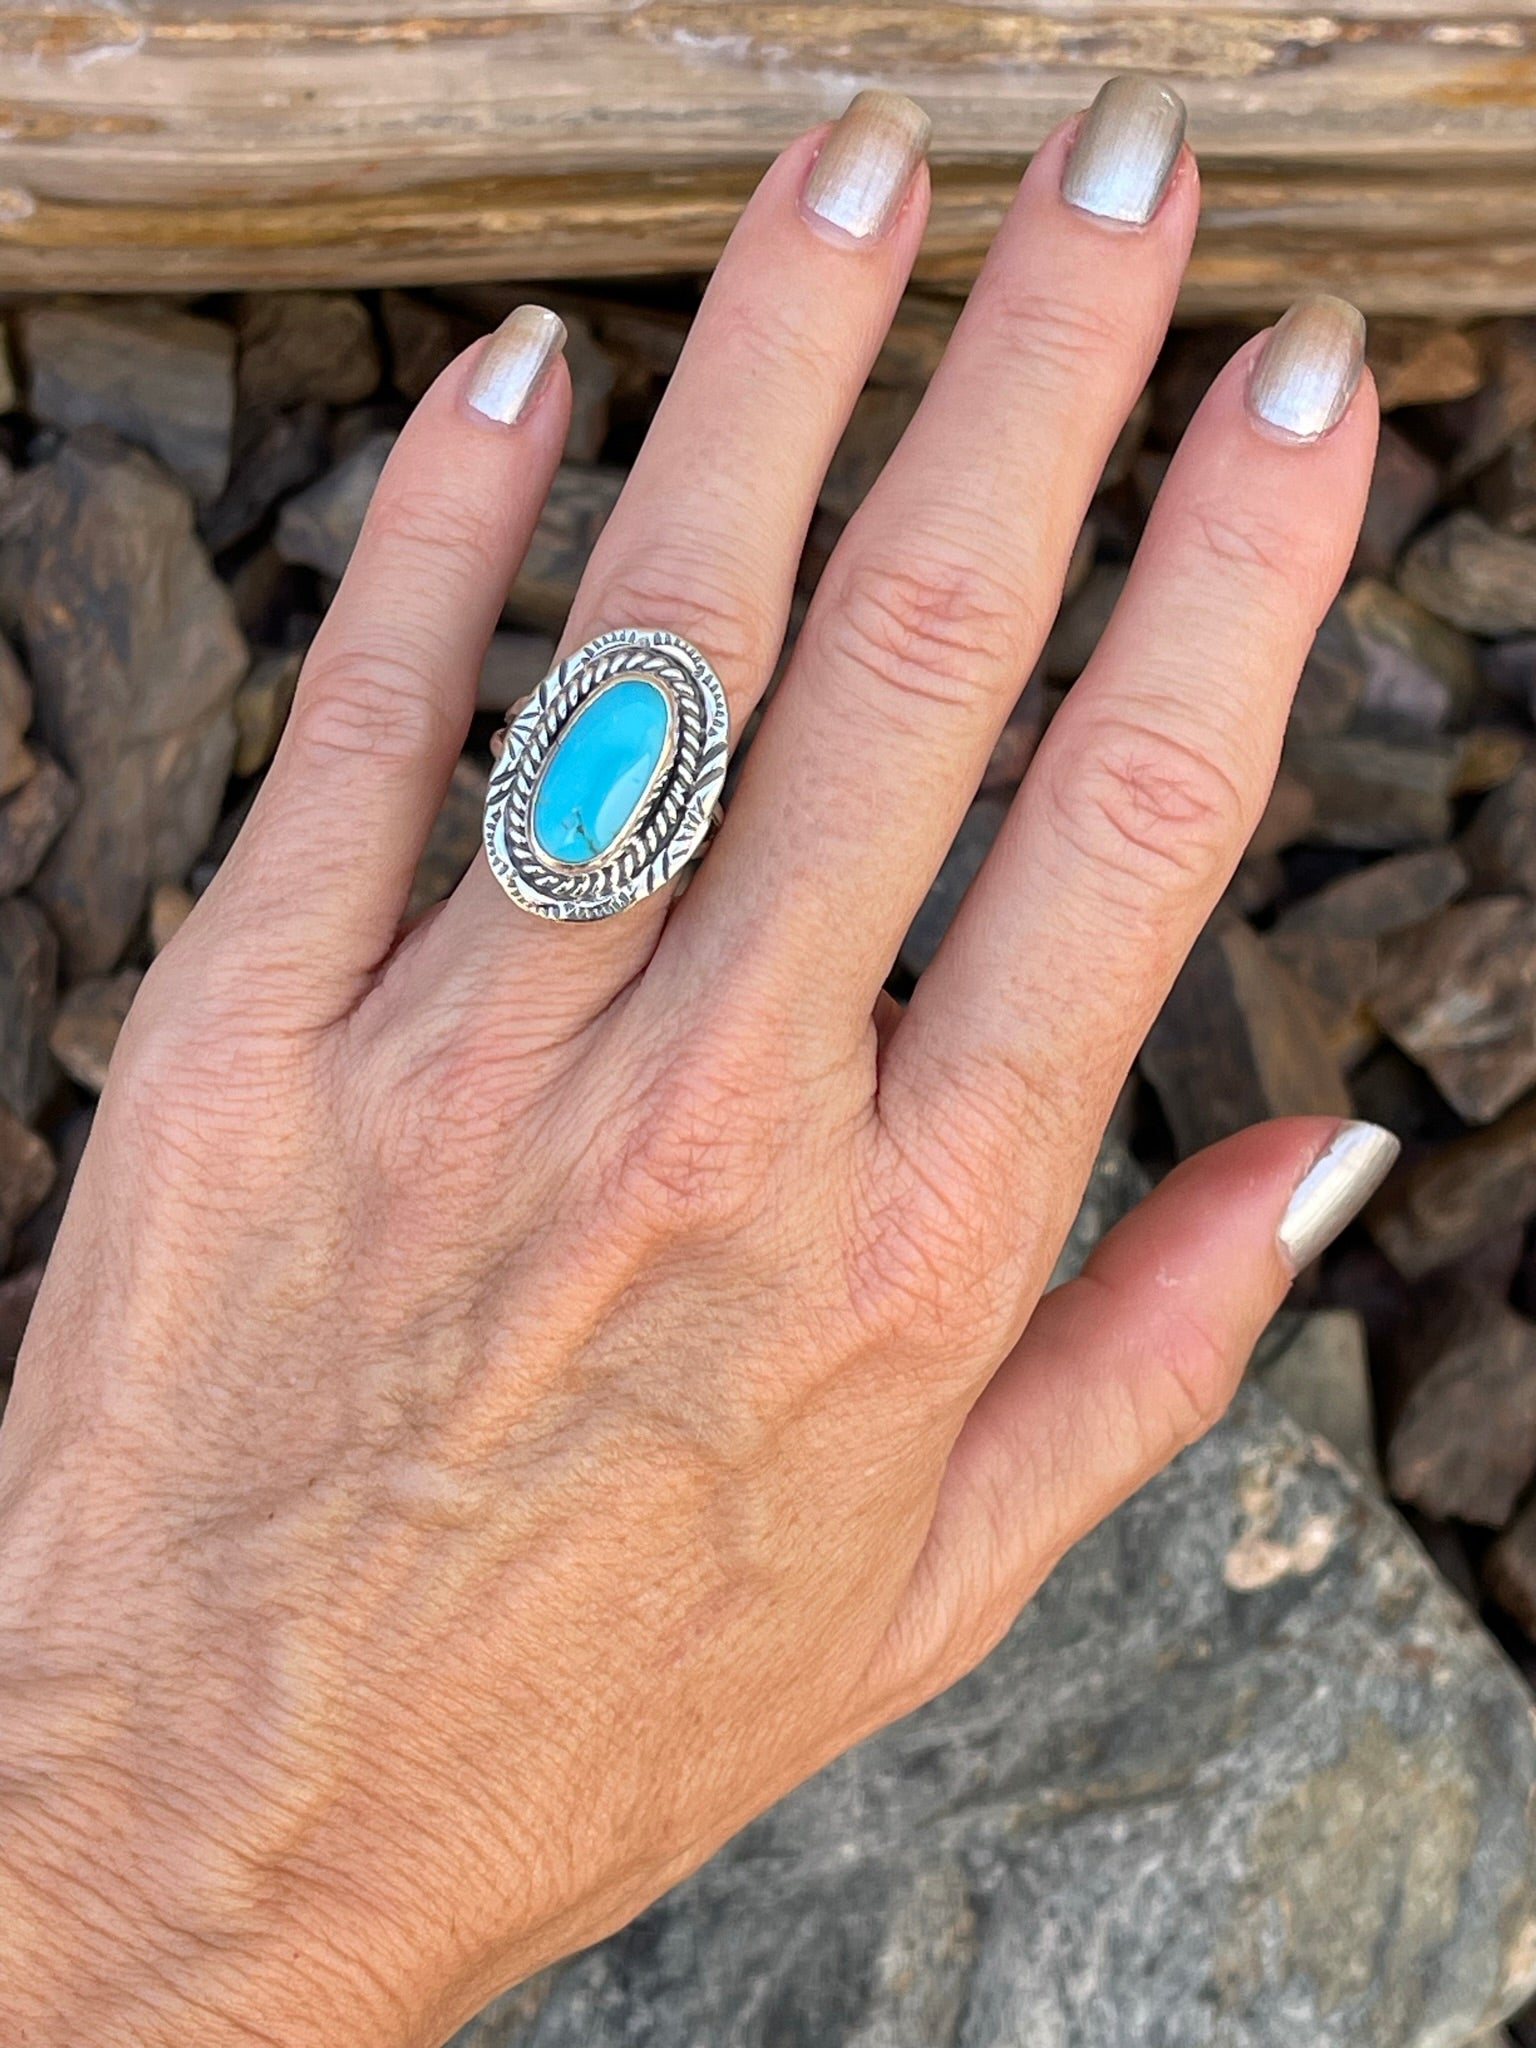 Handmade Sterling Silver Kingman Turquoise Ring with Stamp Trim - Size 6